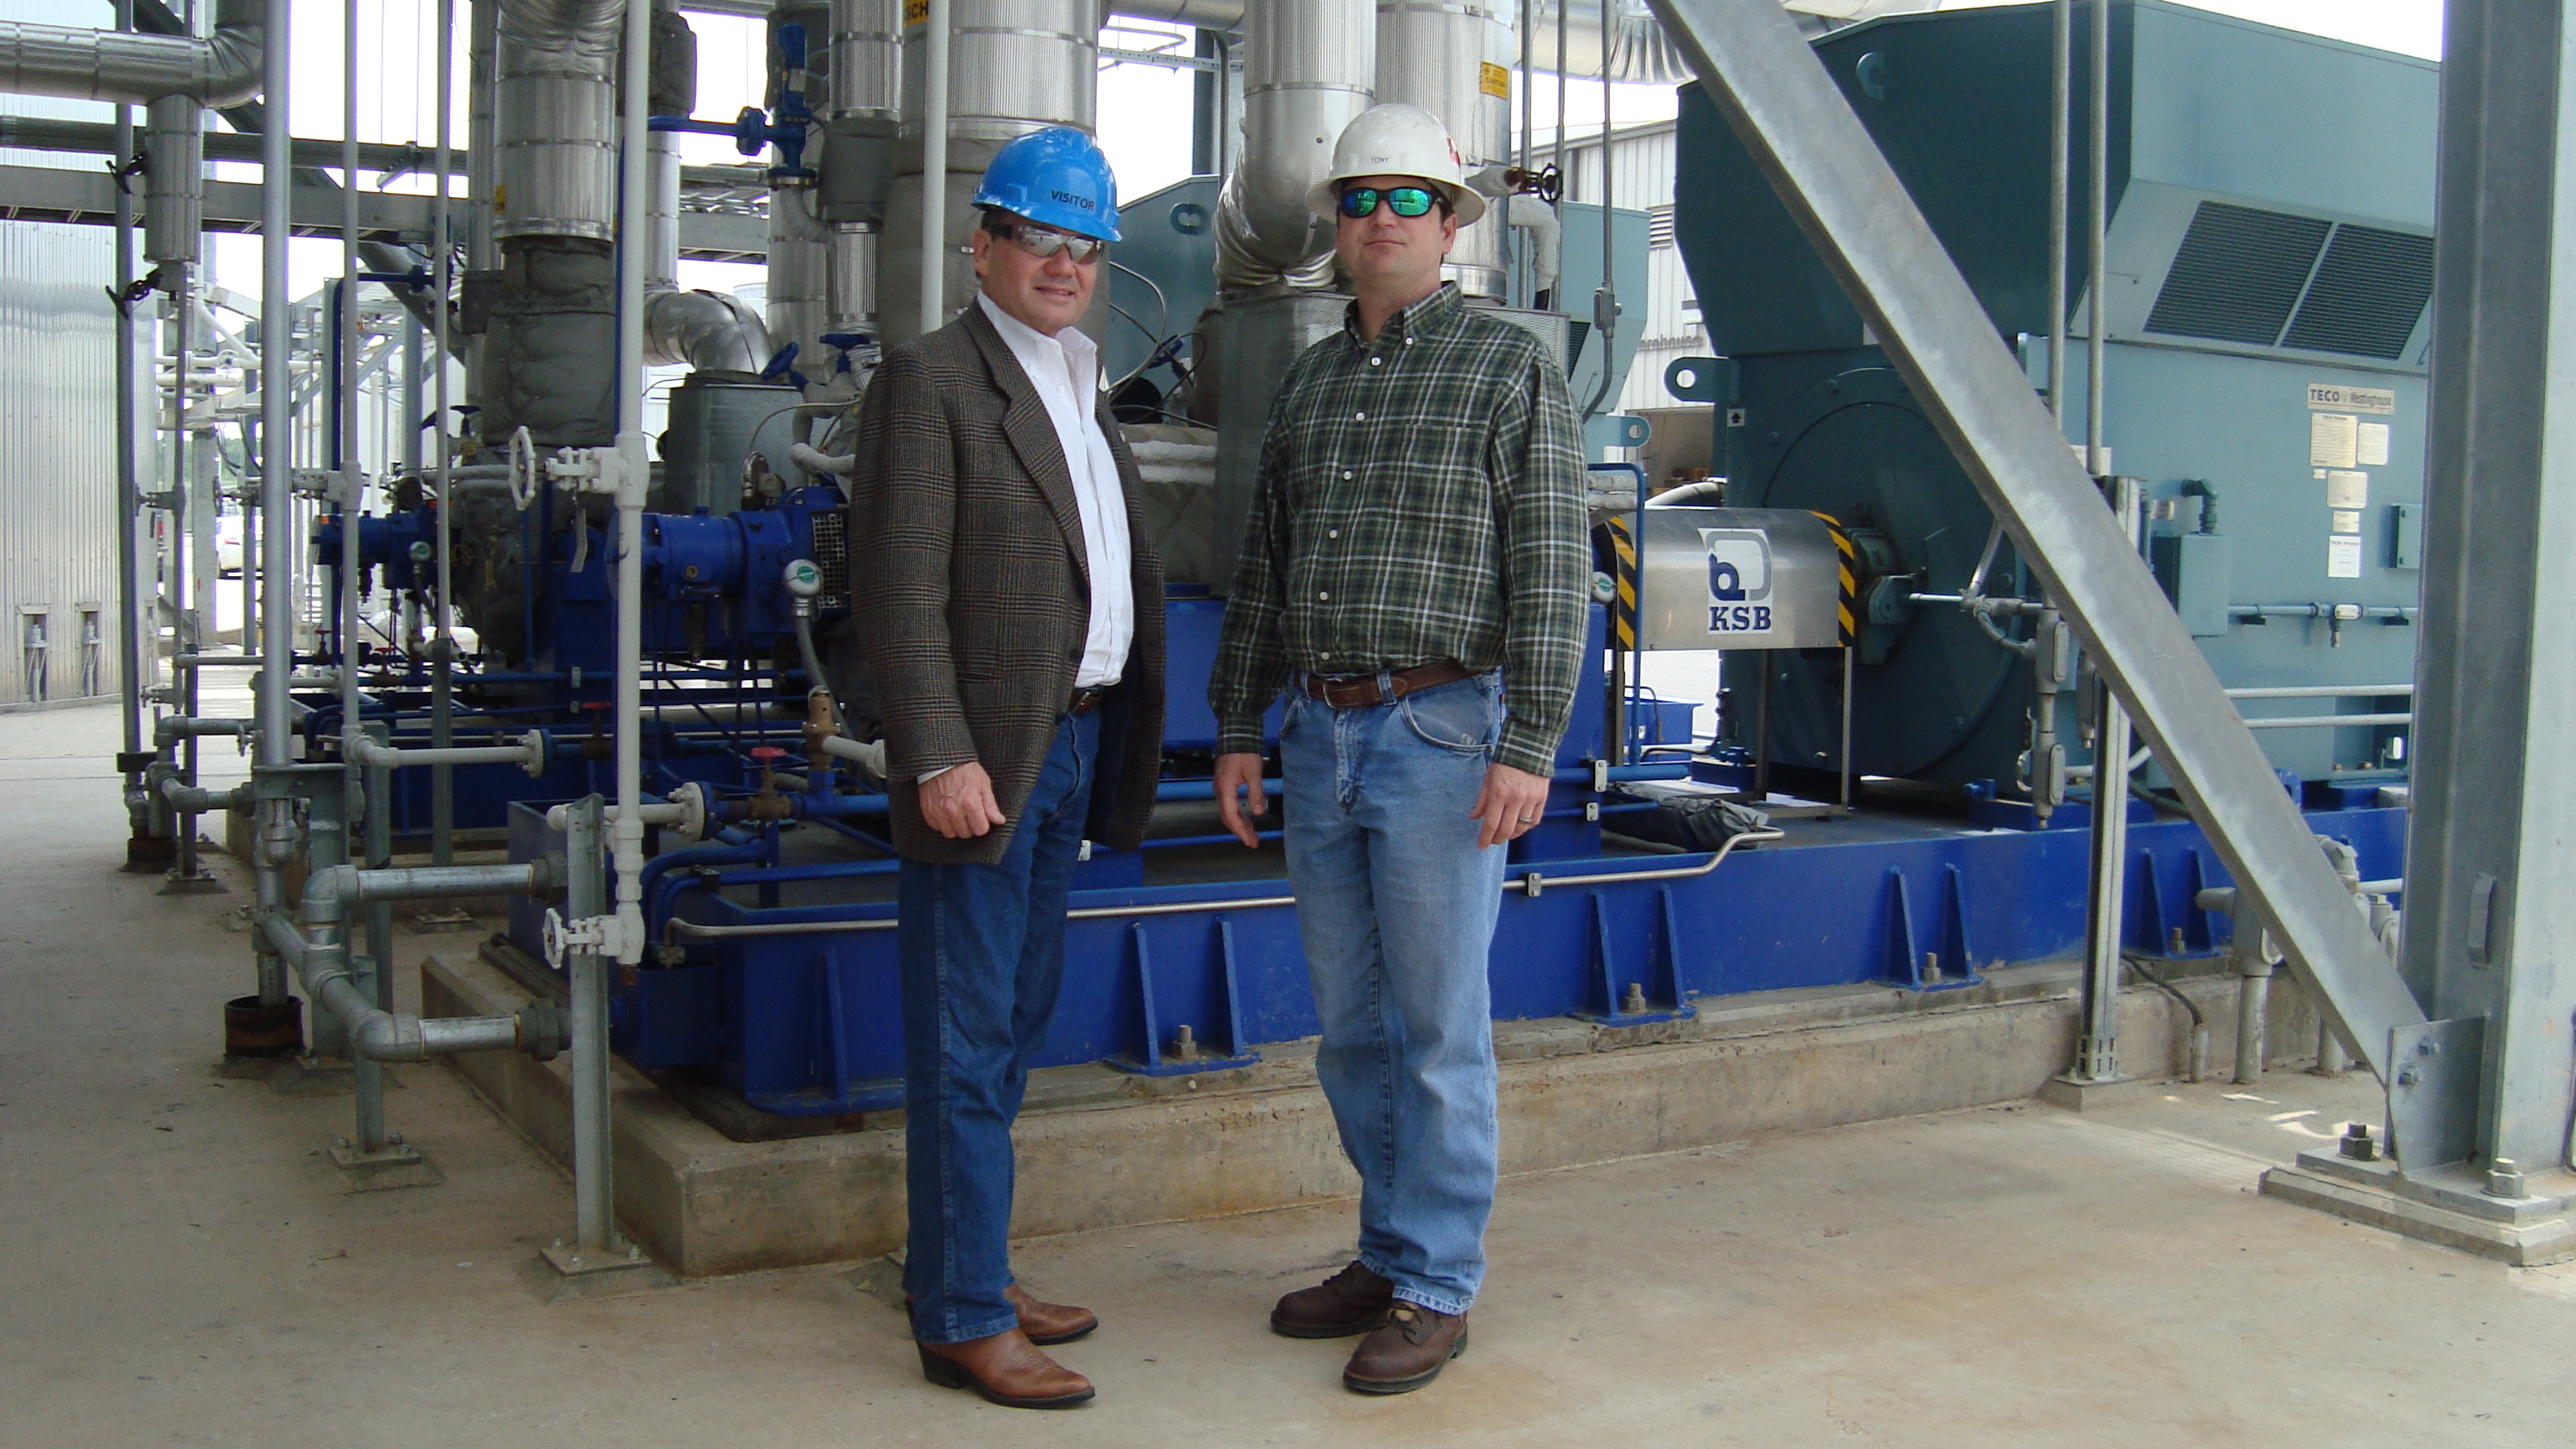 Al Lee for Texas Railroad Commission 2012 visits Texas' most modern Electric Generating plant